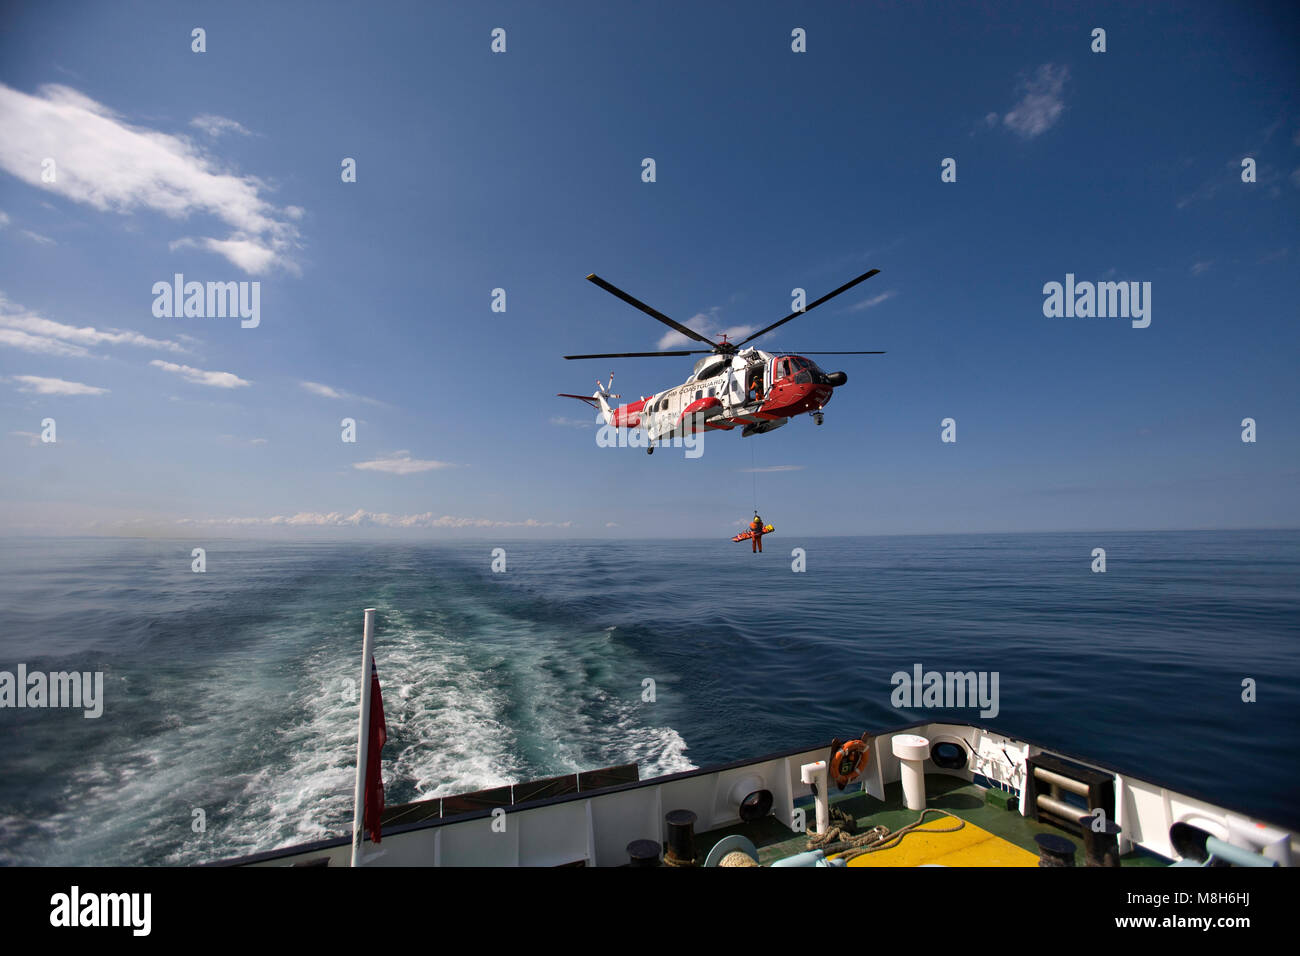 HM Coastguard Sikorsky helicopter carries out a training rescue in the Minch over the Caledonian Macbrayne Ulapool to Stornoway ferry. Stock Photo